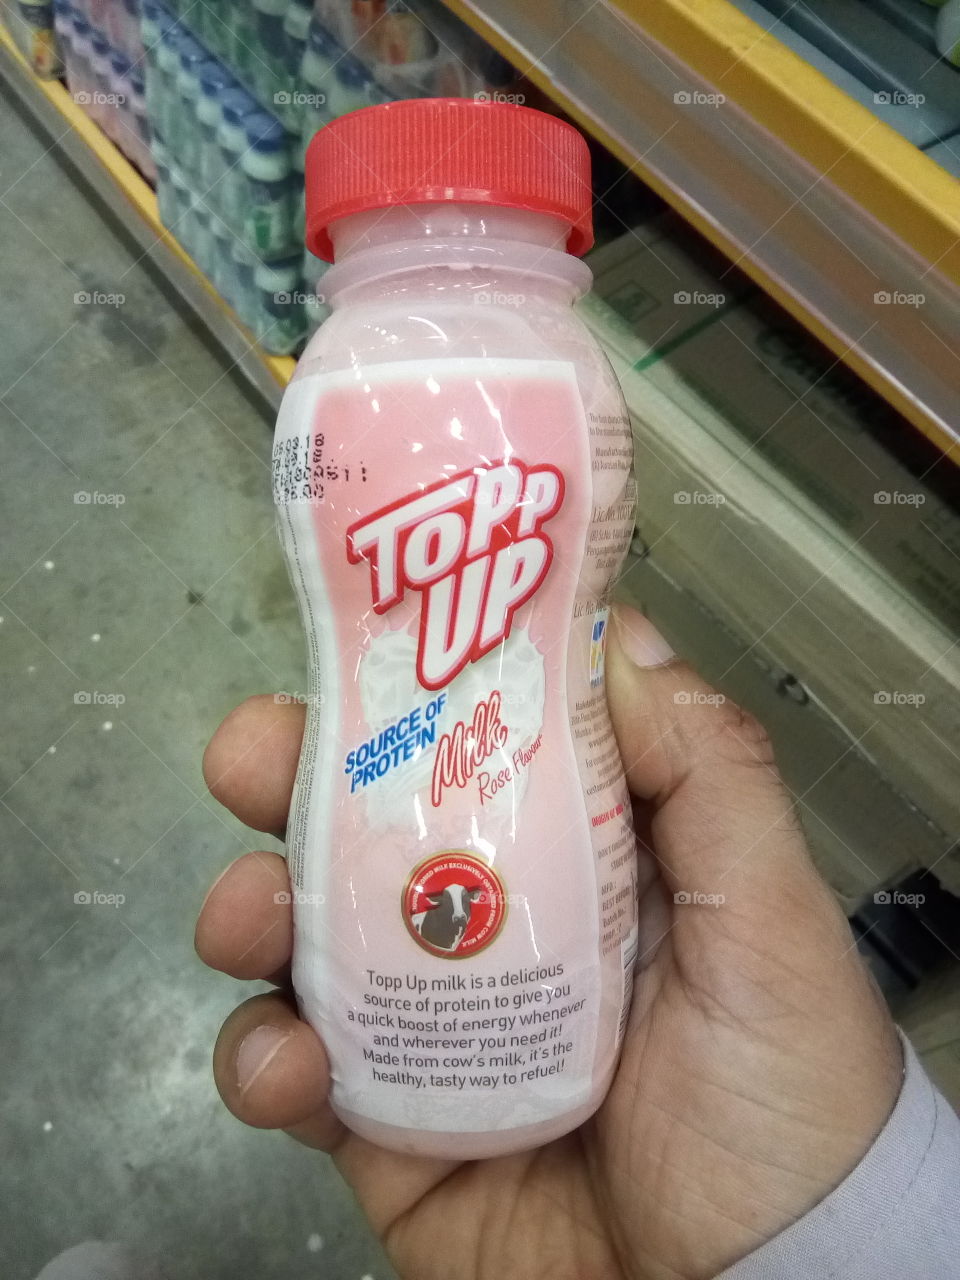 Topp up rose flavor milk. A source of protein.